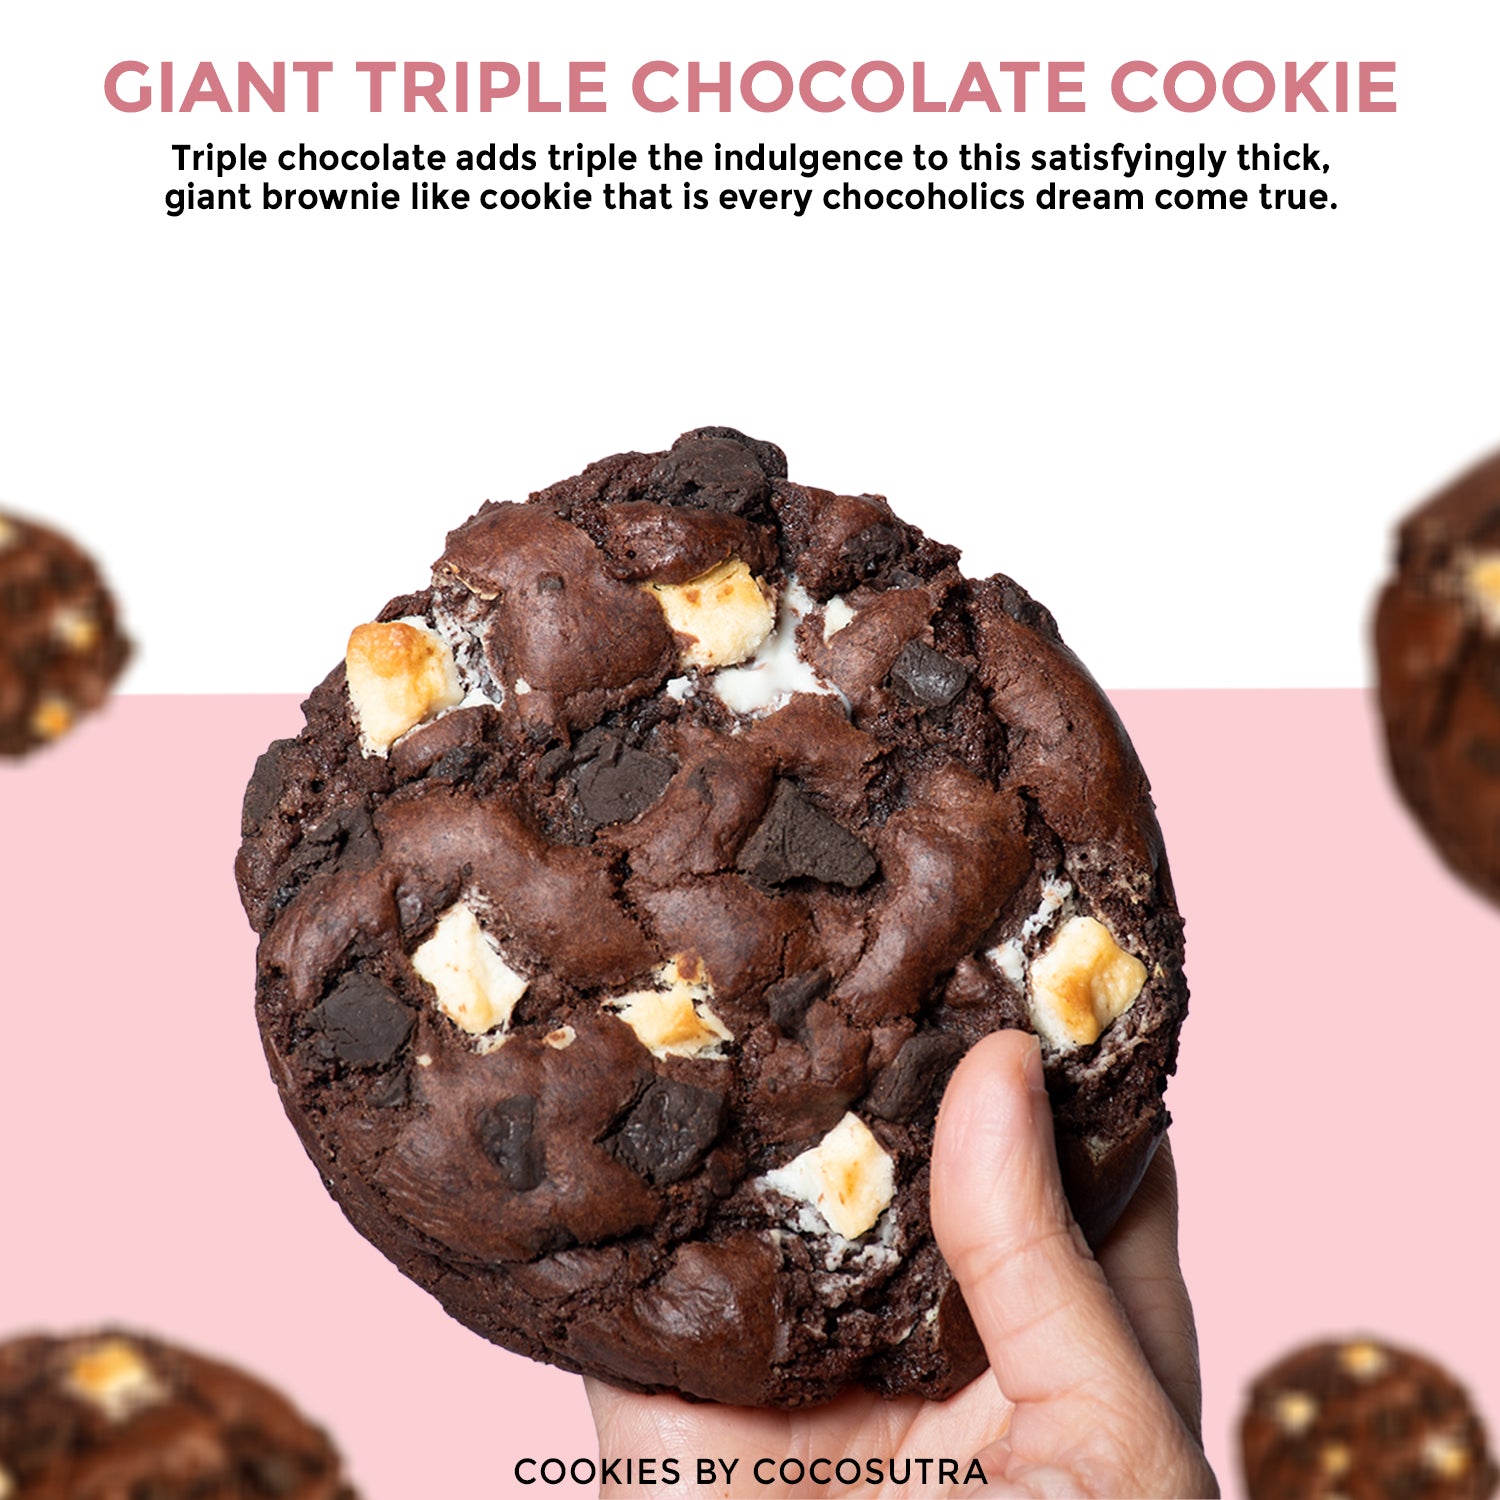 Cocosutra Giant Triple Chocolate Cookies